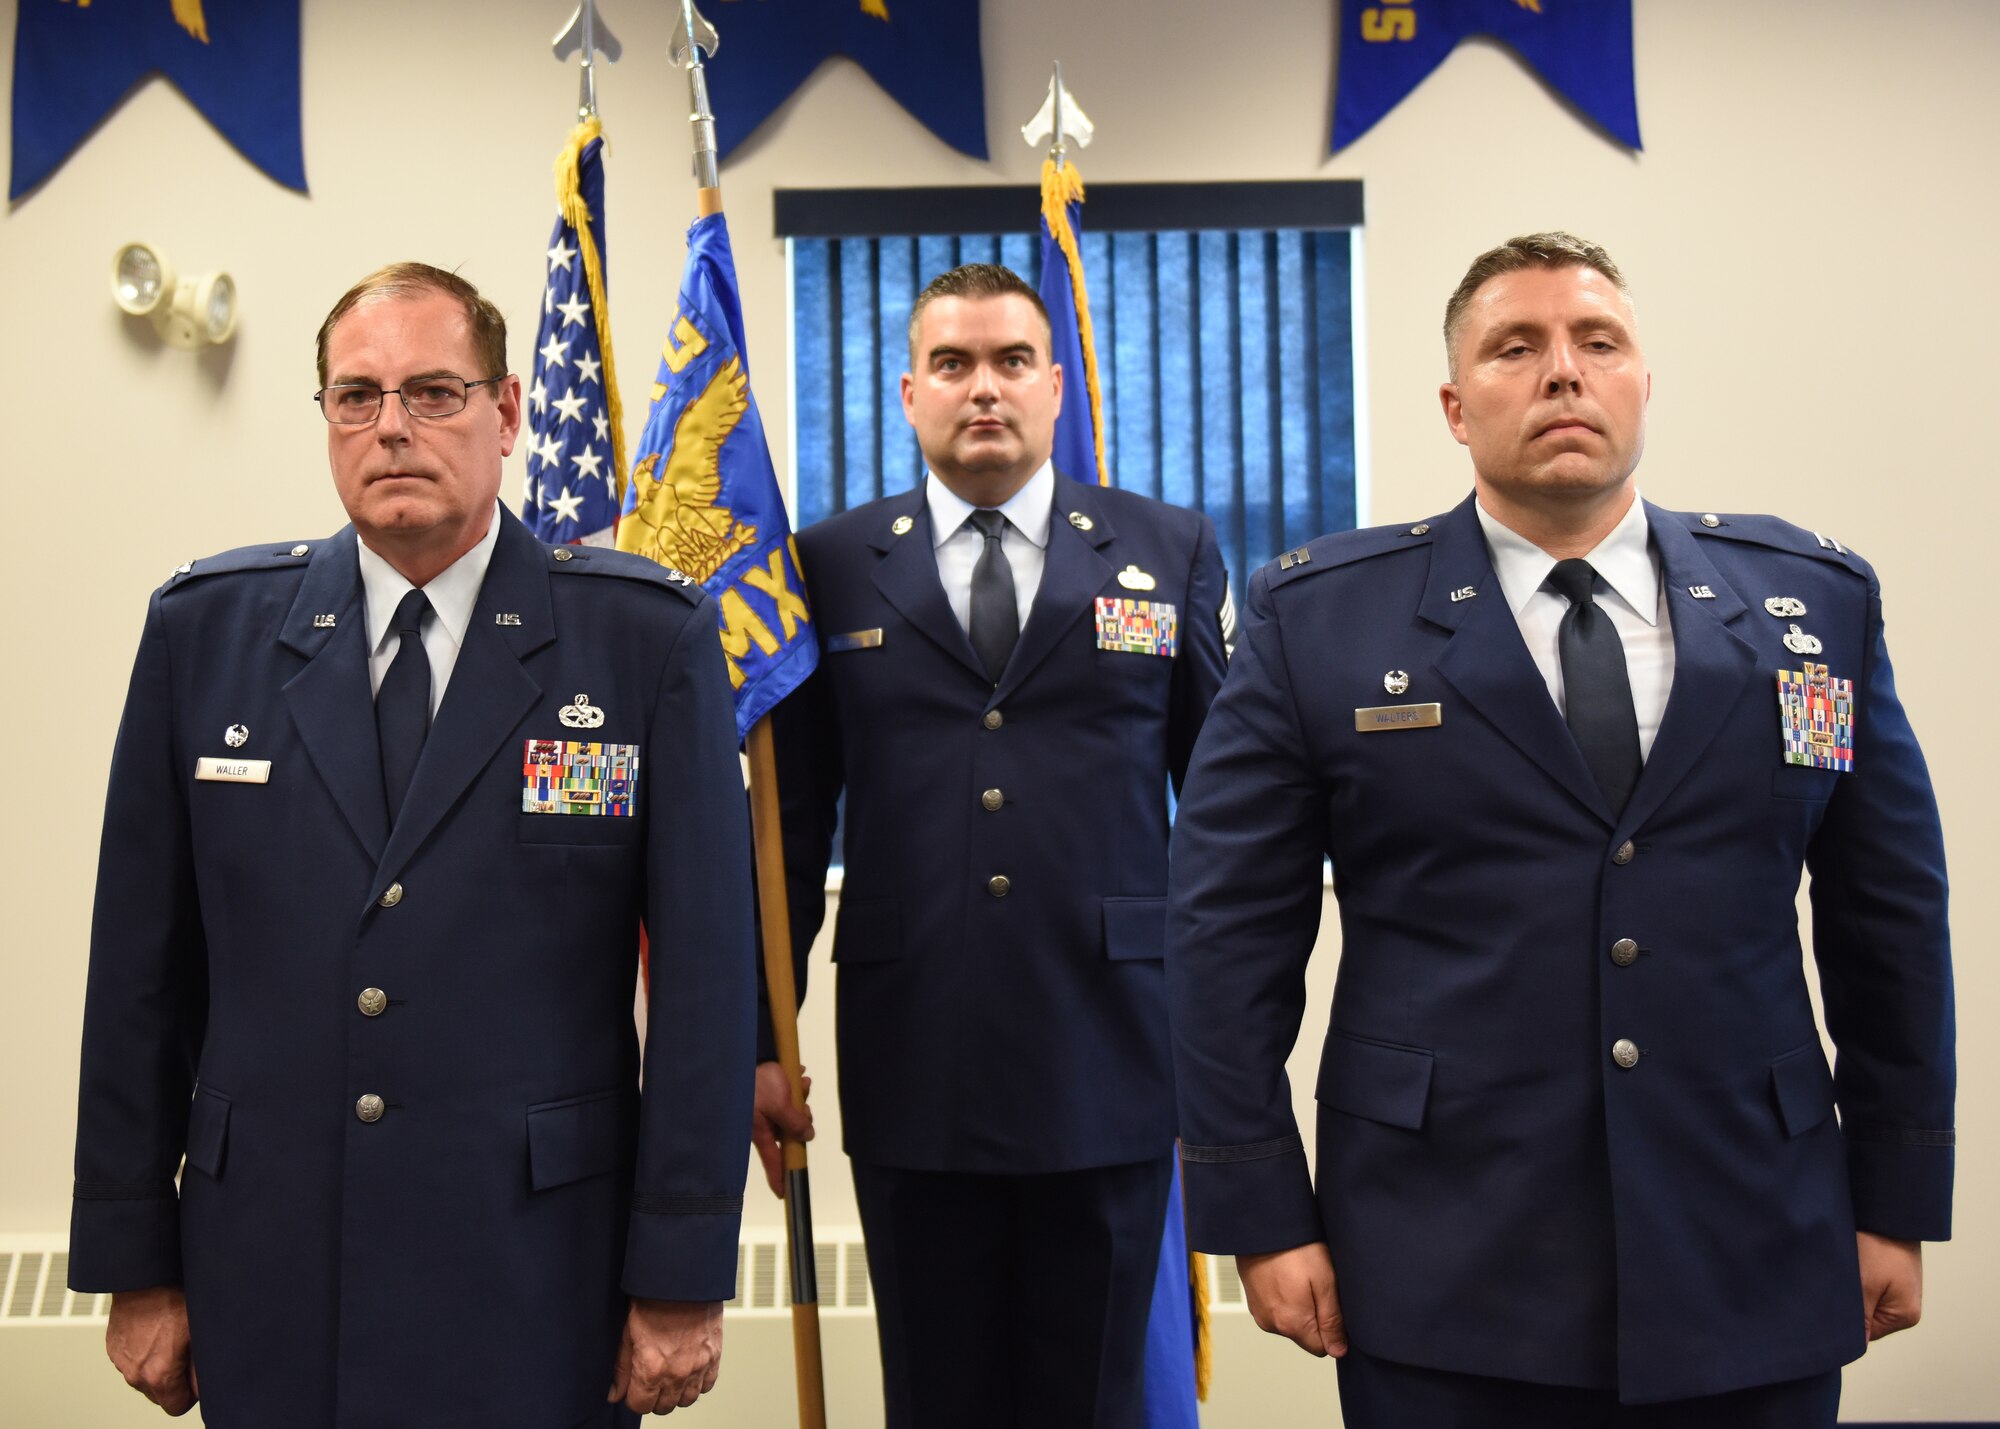 Capt. Joseph E. Walters, commander of the 911th Aircraft Maintenance Squadron, Col. Clifford Waller, commander of the 911th Maintenance Group, and Chief Master Sgt. Benjamin Waxenfelter, production supervisor with the 911th Aircraft Maintenance Squadron, stand at attention during an assumption of command ceremony at the Pittsburgh International Airport Air Reserve Station, Pennsylvania Aug. 3, 2019.